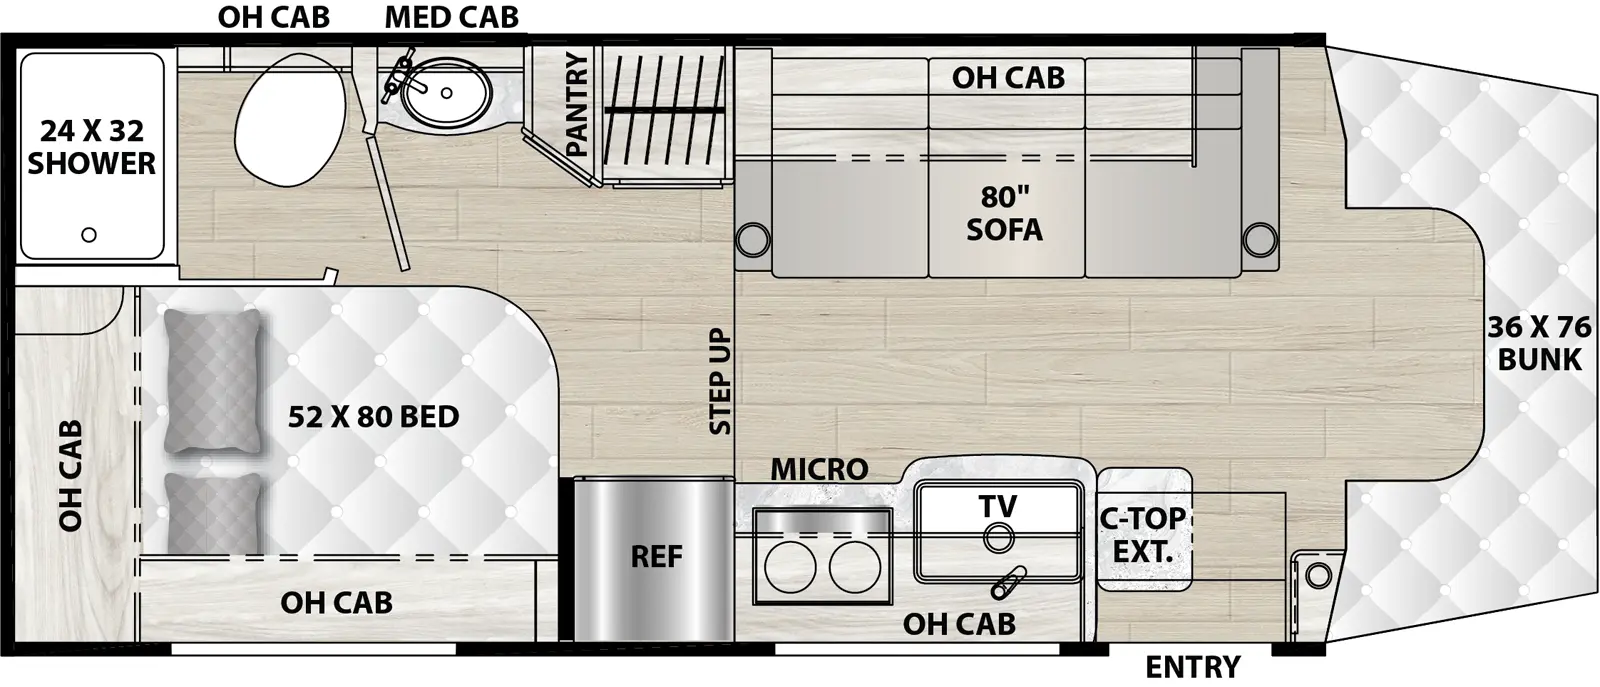 The 24FL has zero slideouts and one entry. Interior layout front to back: bunk over cab, off-door side sofa bed with overhead cabinet, and pantry; door side entry, kitchen counter with sink, countertop extension, overhead cabinet, TV, microwave, cooktop, and refrigerator; rear off-door side bathroom sink with medicine cabinet, and room with toilet, shower and overhead cabinet; rear door side bed with overhead cabinets.